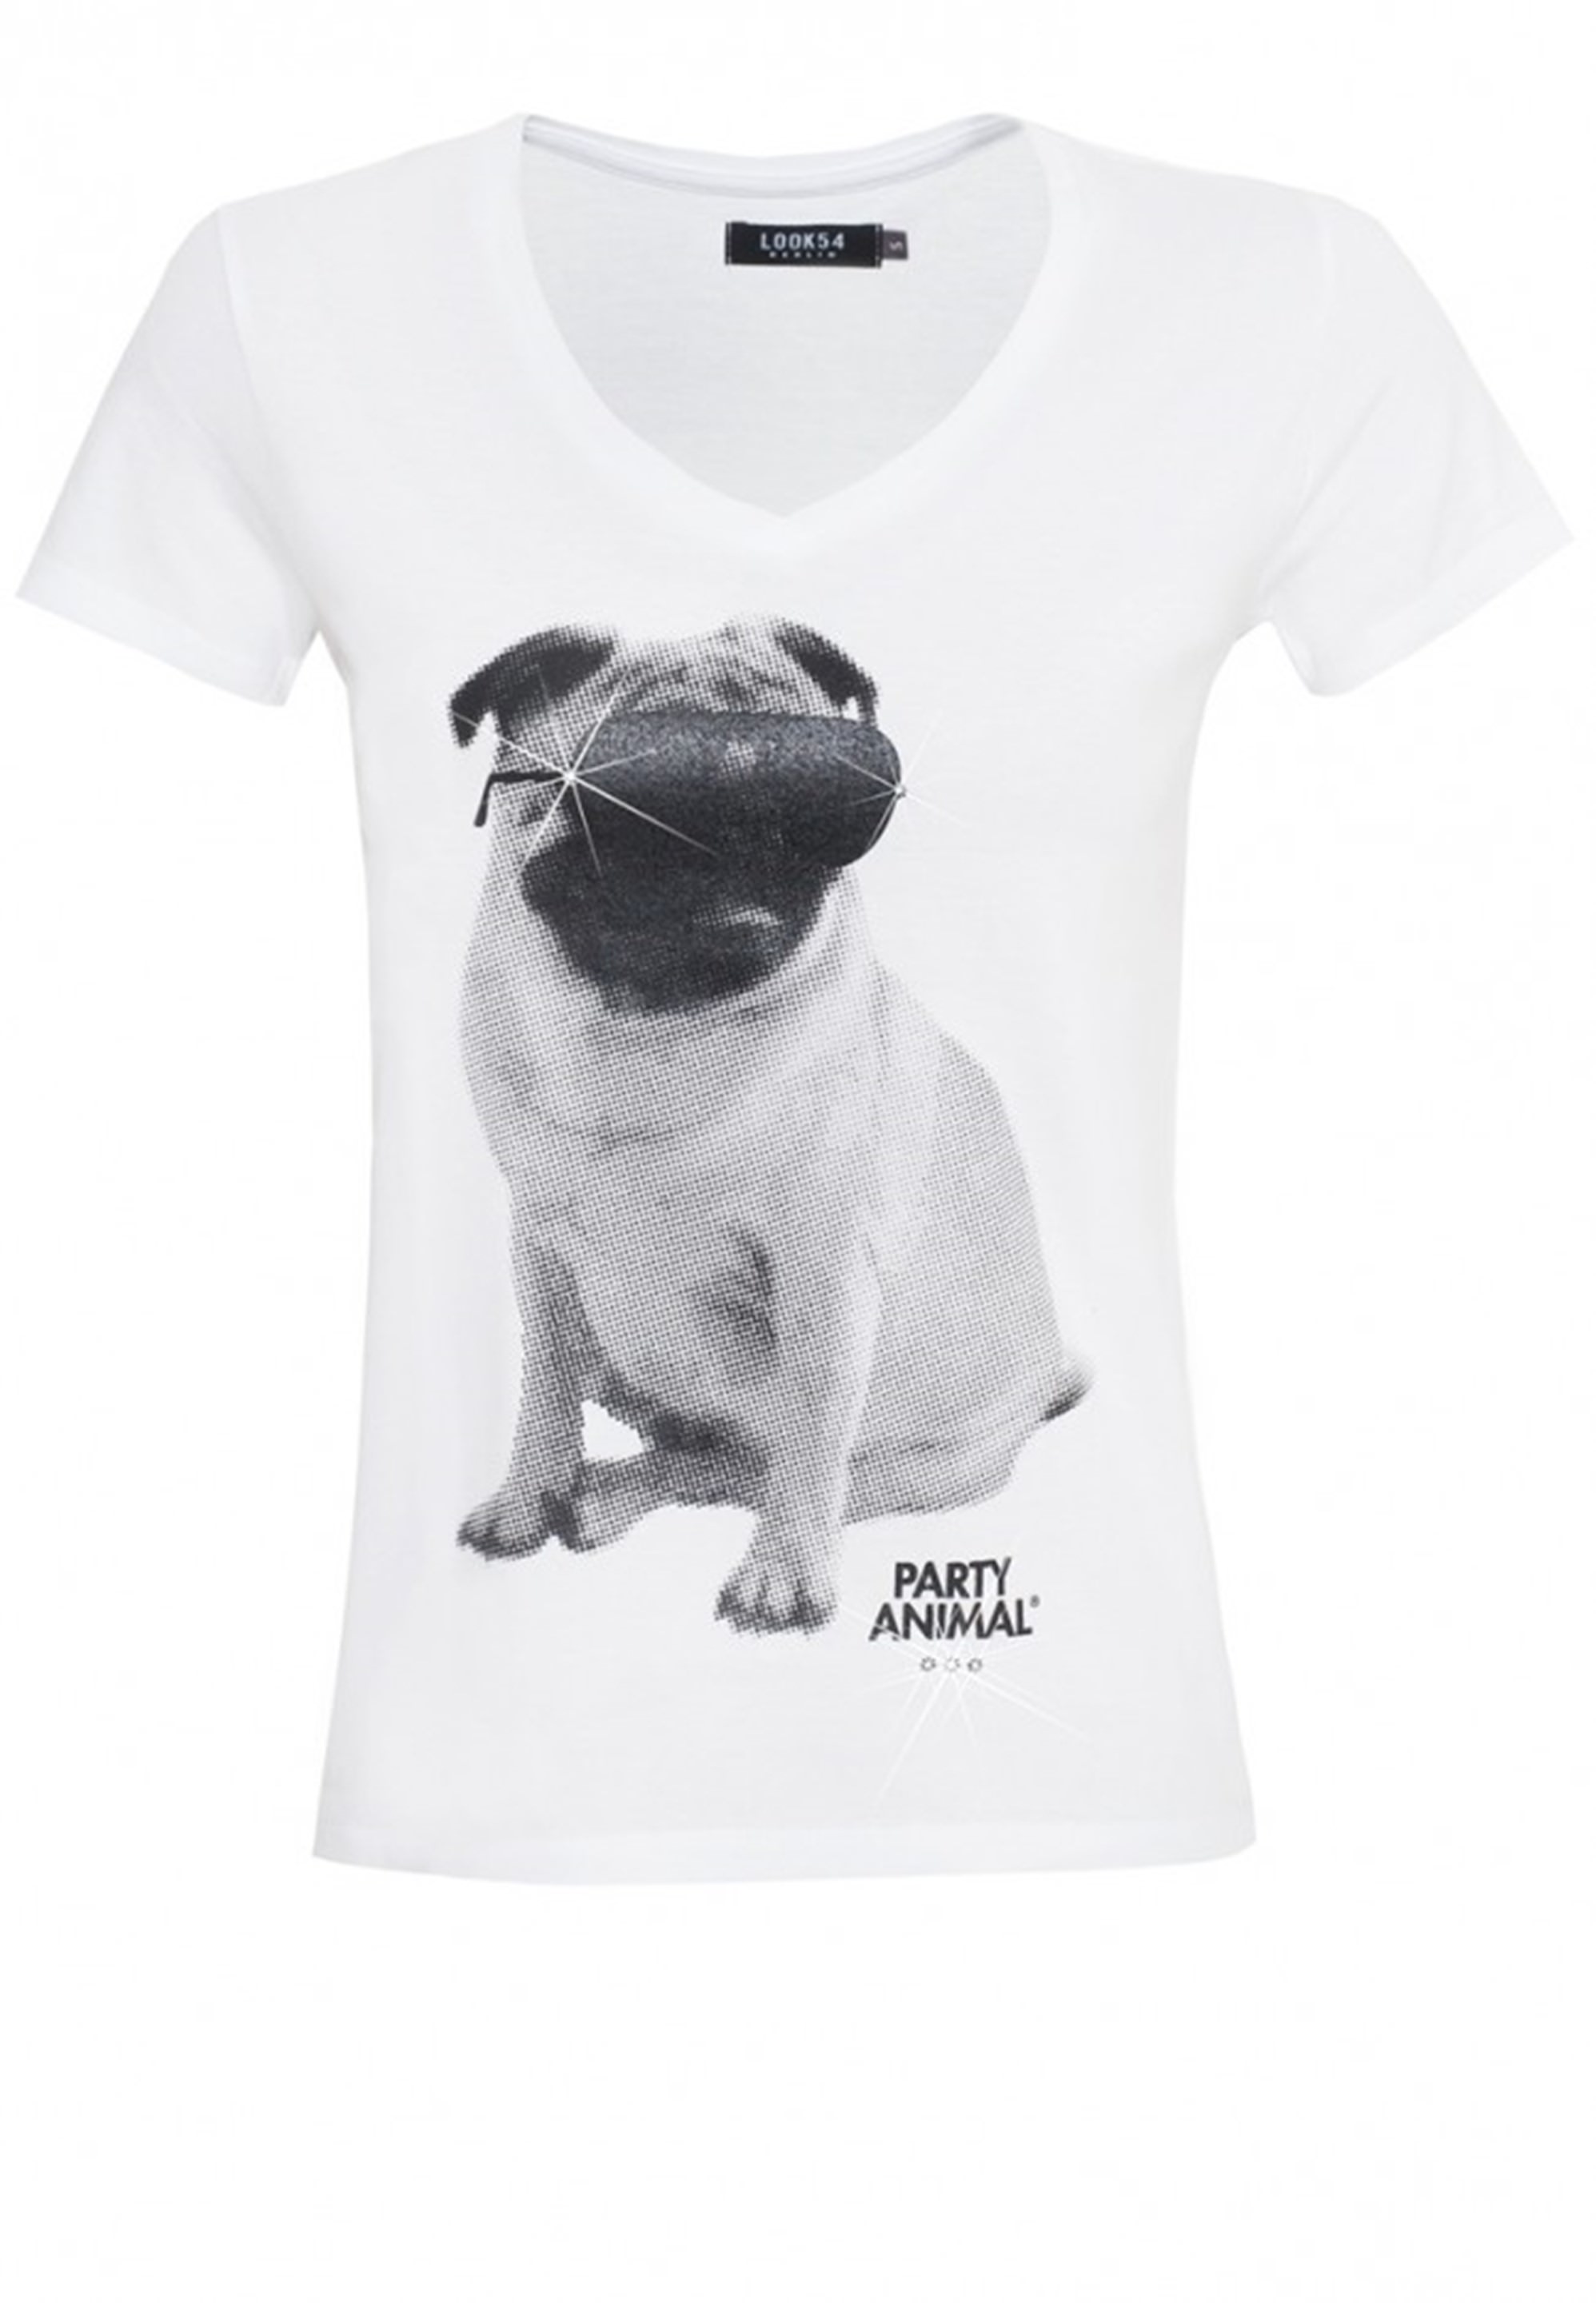 Party Animal - The Mops - Shirt